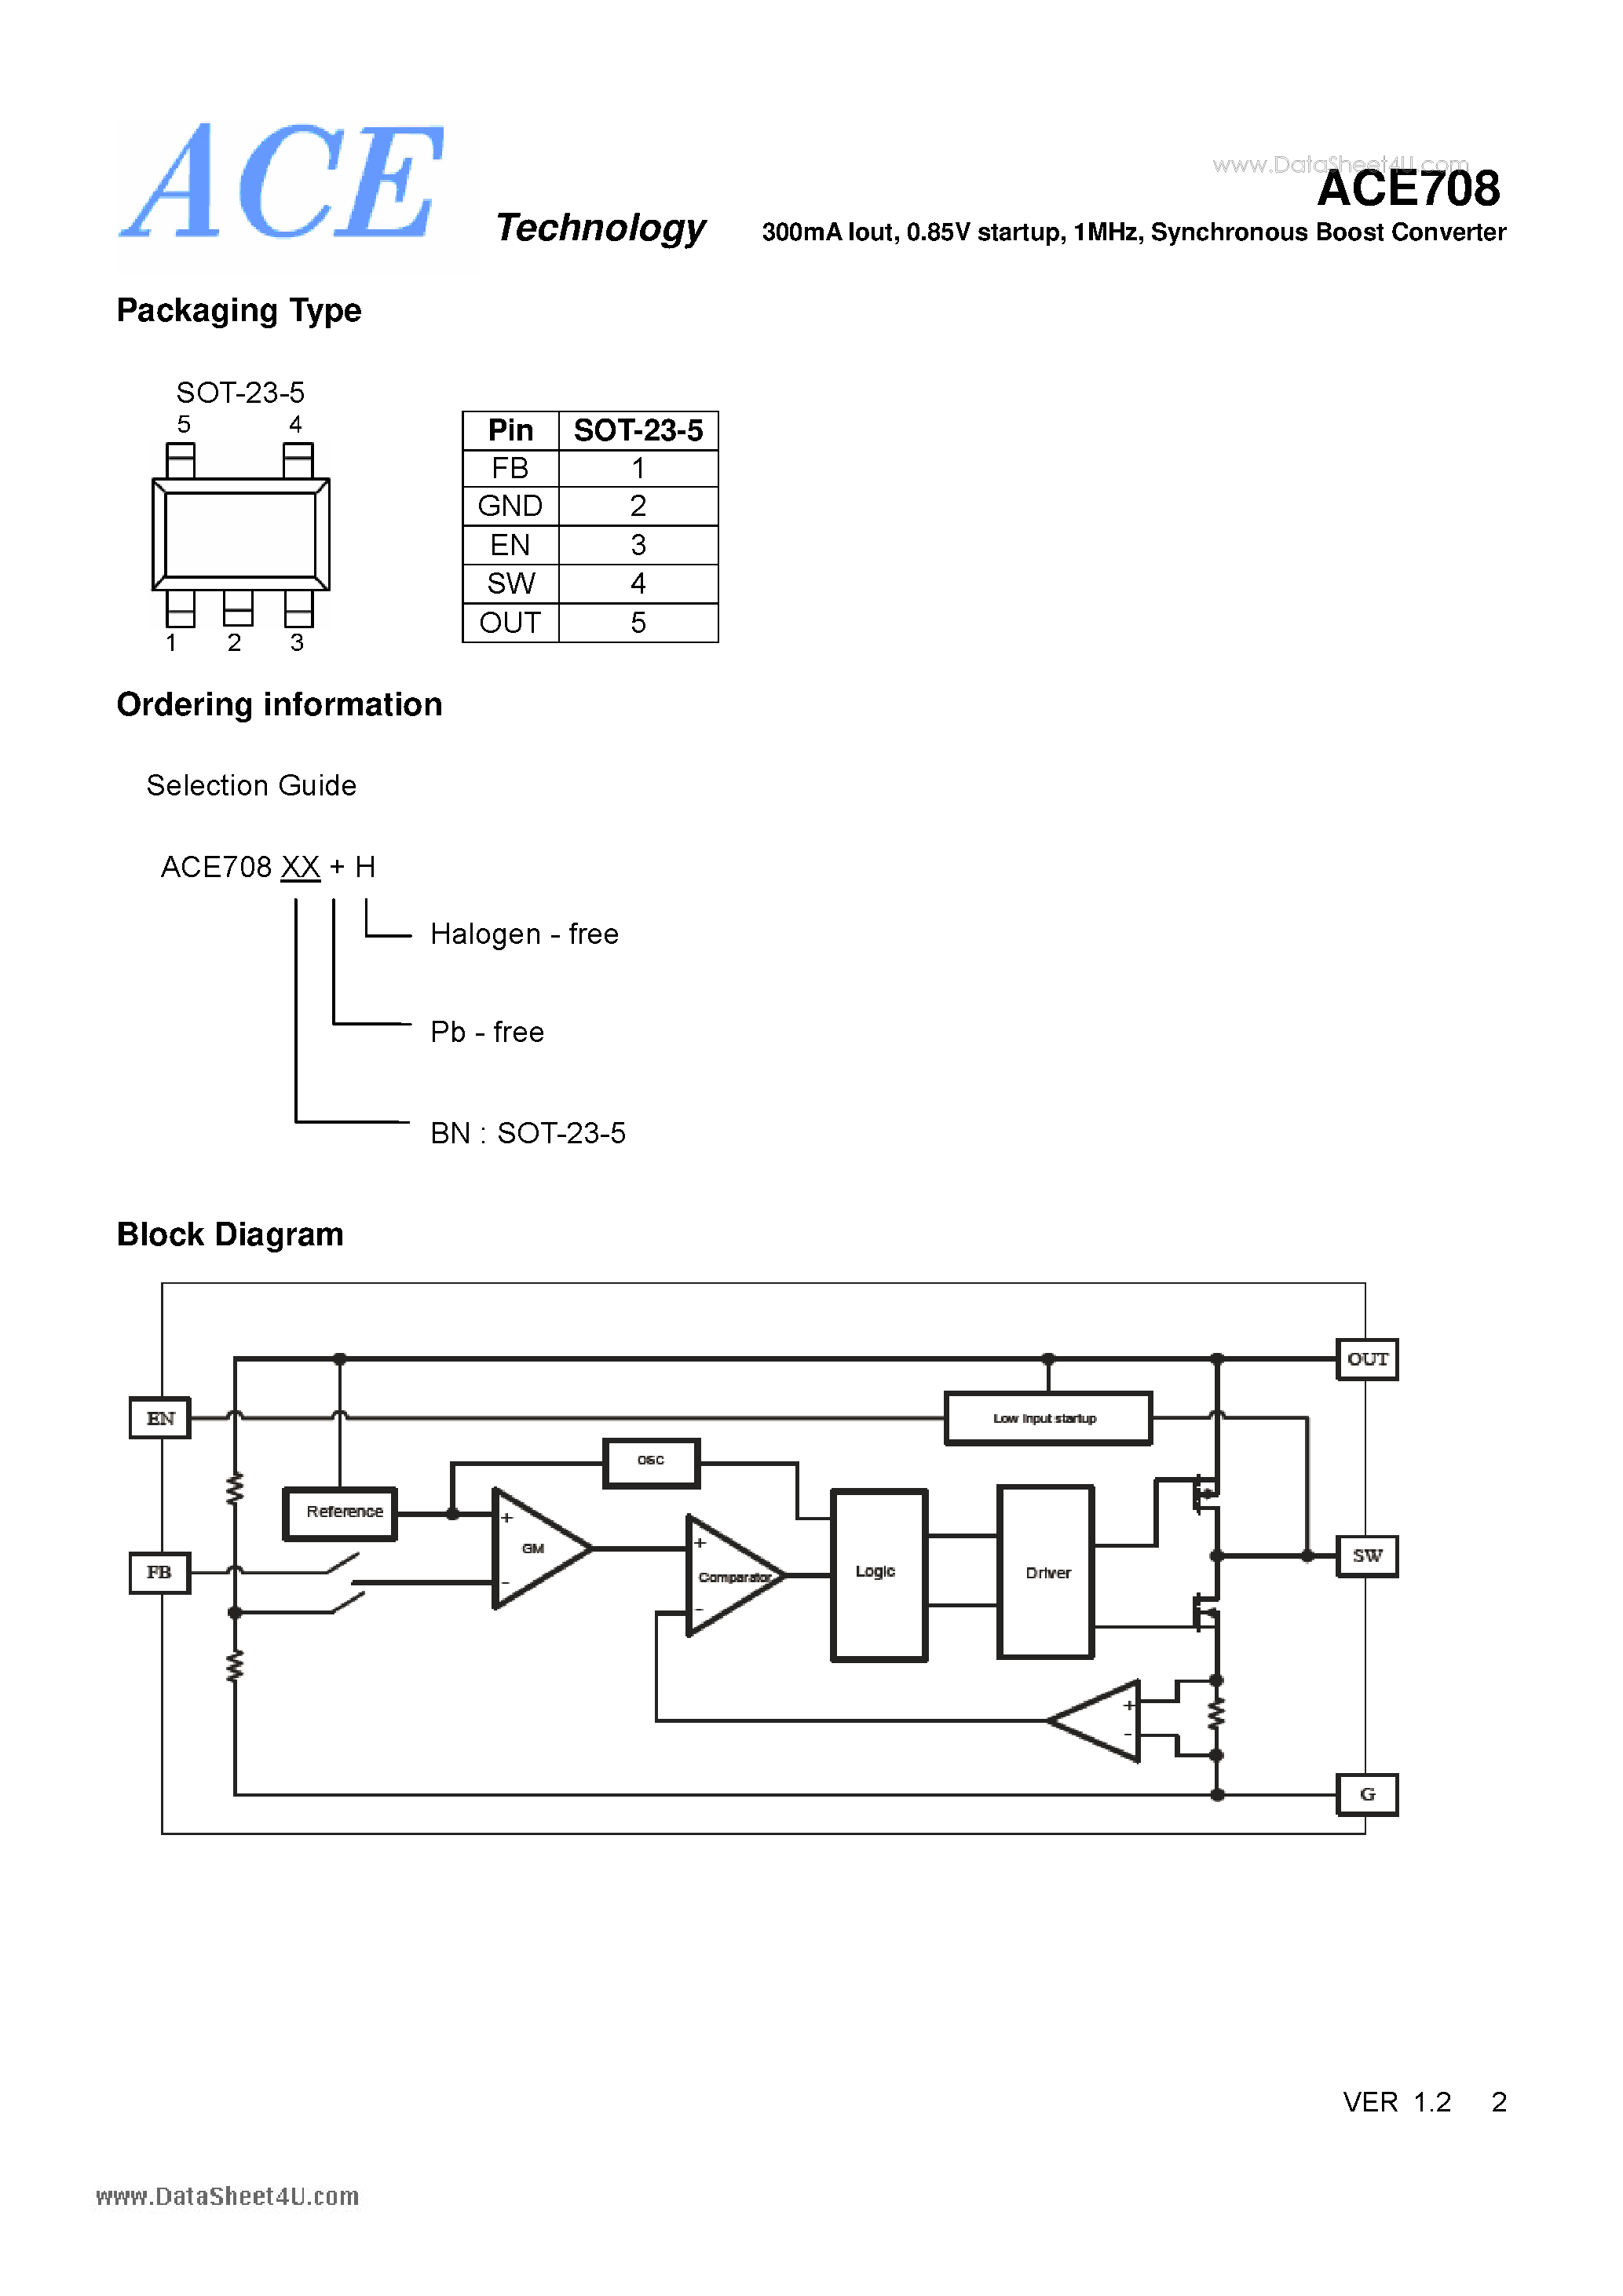 Datasheet ACE708 - 300mA Iout 0.85V startup 1MHz Synchronous Boost Converter page 2